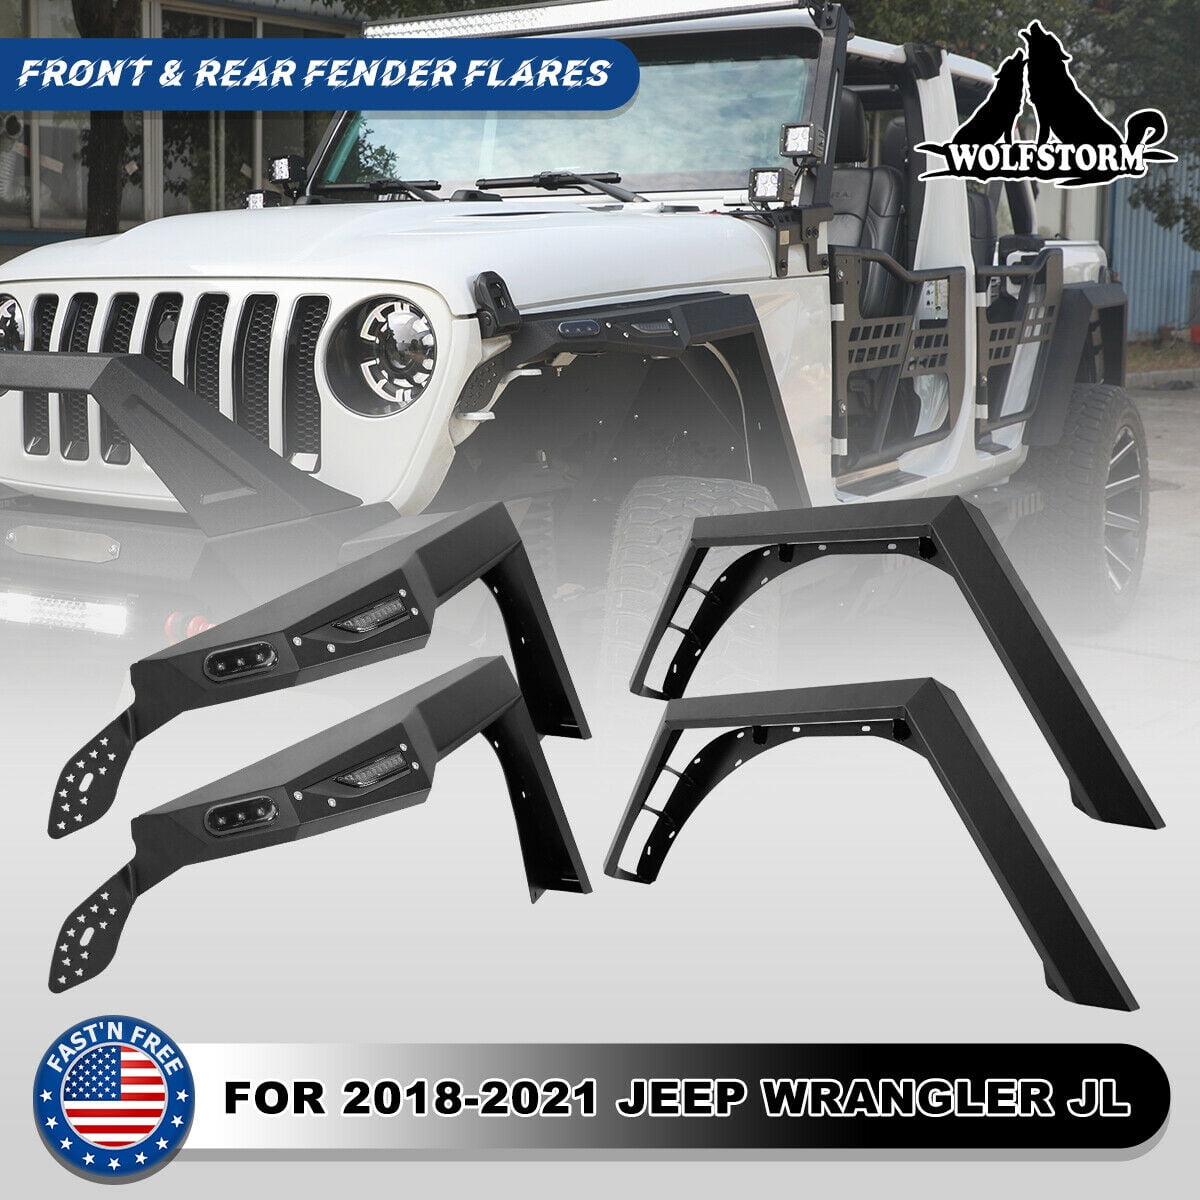 WOLFSTORM Front&Rear Fender Flares Fit for 2018-2021 Jeep Wrangler JL 4  Doors/2 Door,LED DRL Lights and Sequential LED Turn Lights,Jeep Wrangler  JL/JLU Fender Flares Replacement Exterior Accessories 